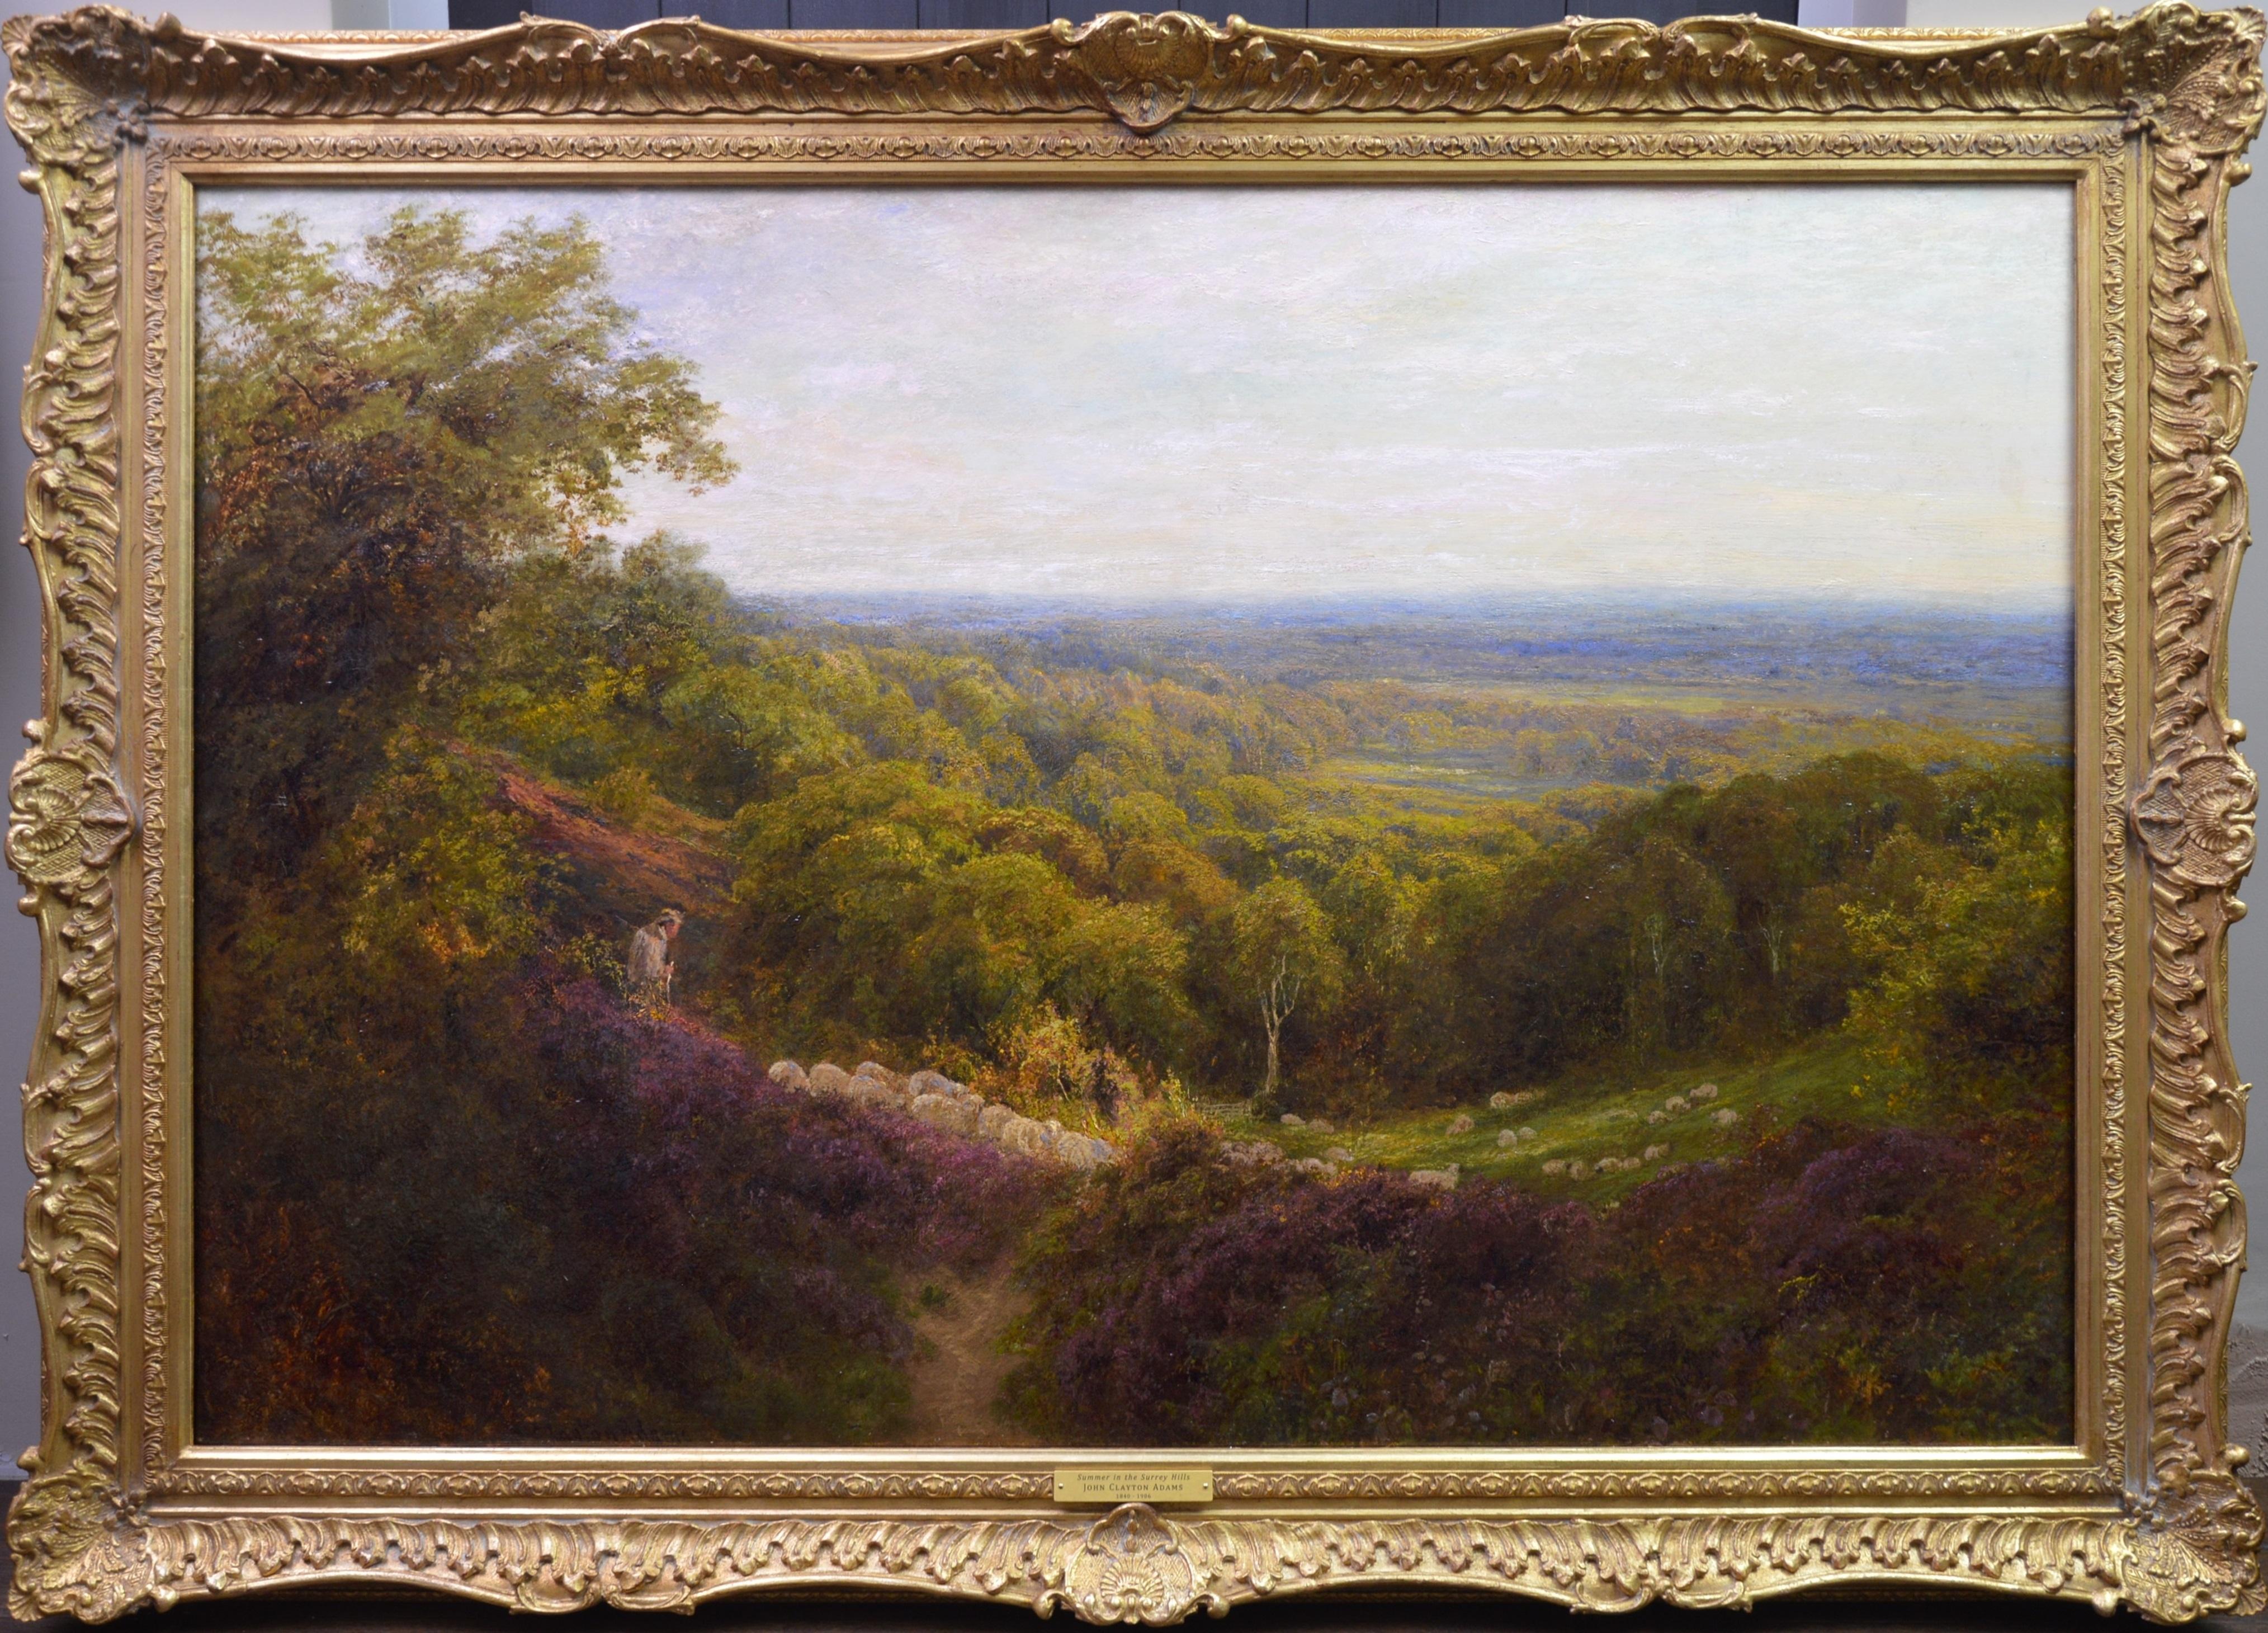 John Clayton Adams Animal Painting - Summer in the Surrey Hills - Very Large 19th Century Landscape Oil Painting